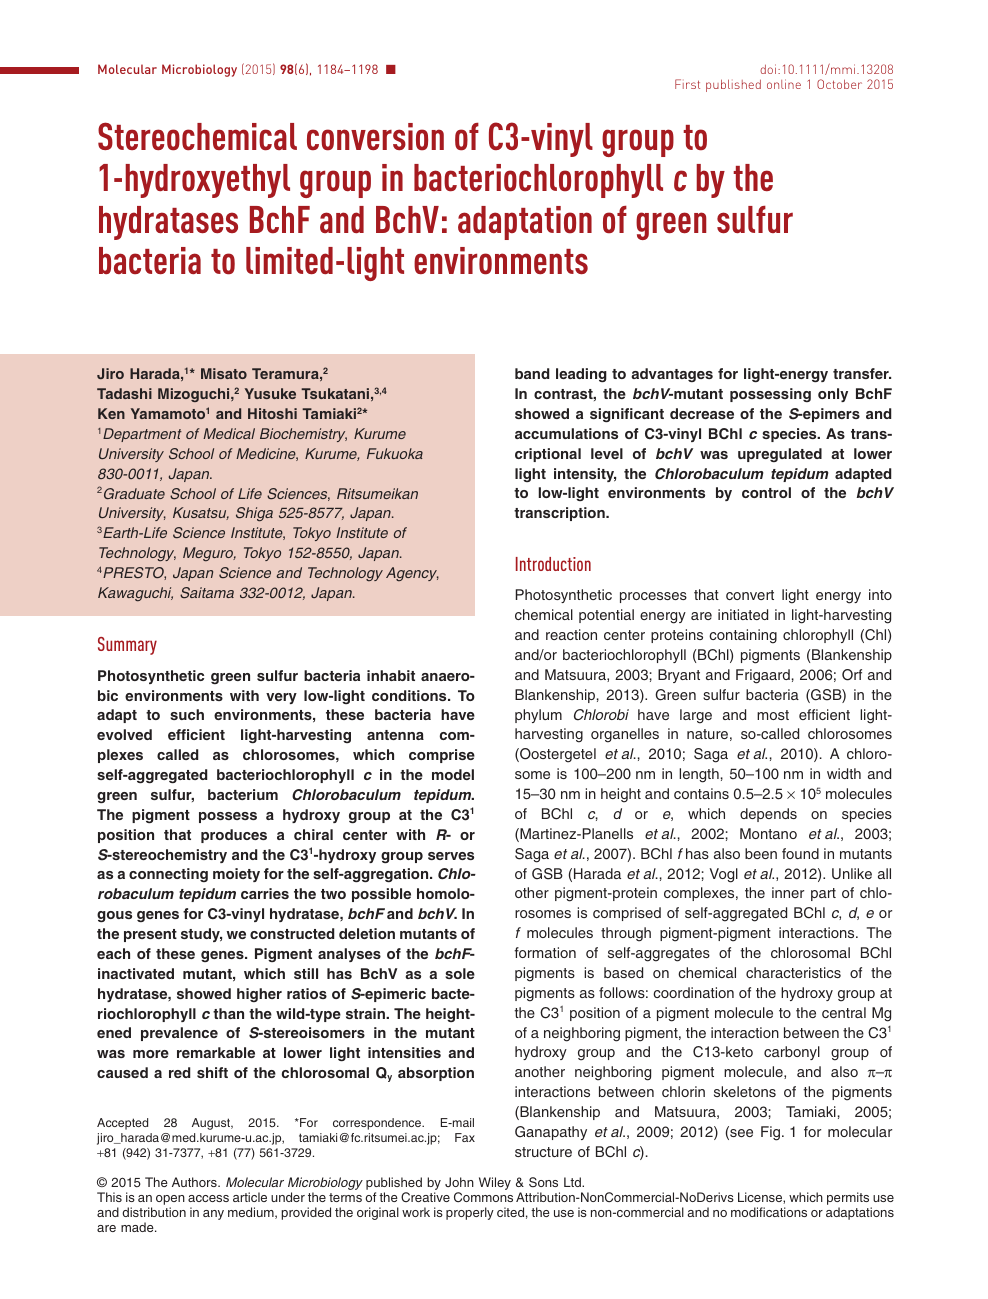 Stereochemical Conversion Of C3 Vinyl Group To 1 Hydroxyethyl Group In Bacteriochlorophyll C By The Hydratases hf And hv Adaptation Of Green Sulfur Bacteria To Limited Light Environments Topic Of Research Paper In Biological